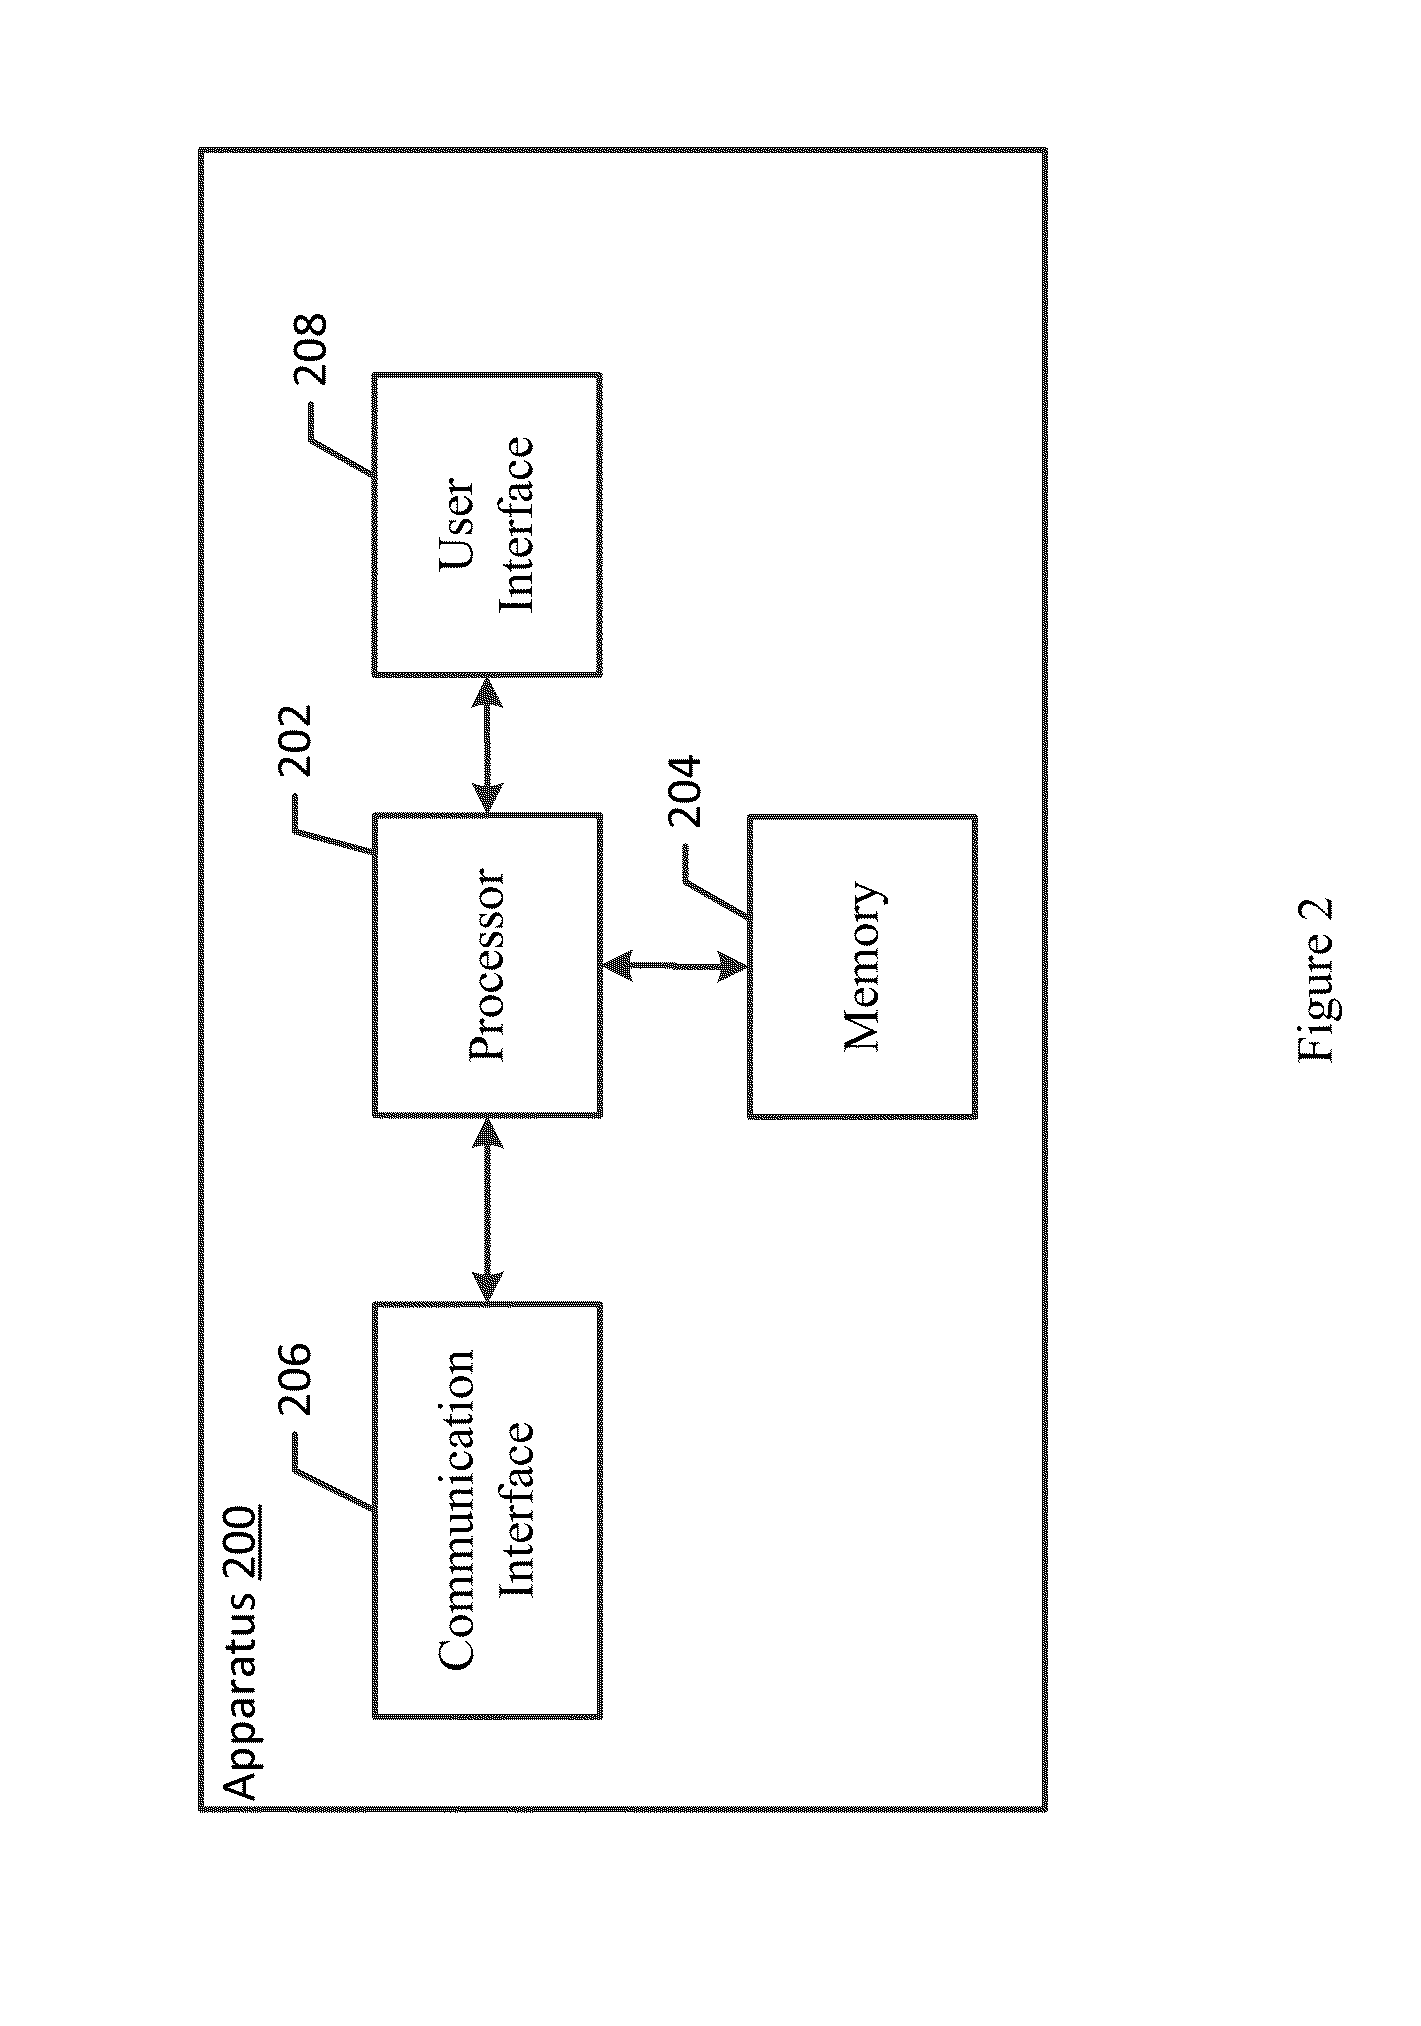 Method and apparatus for generating a composite image based on an ambient occlusion